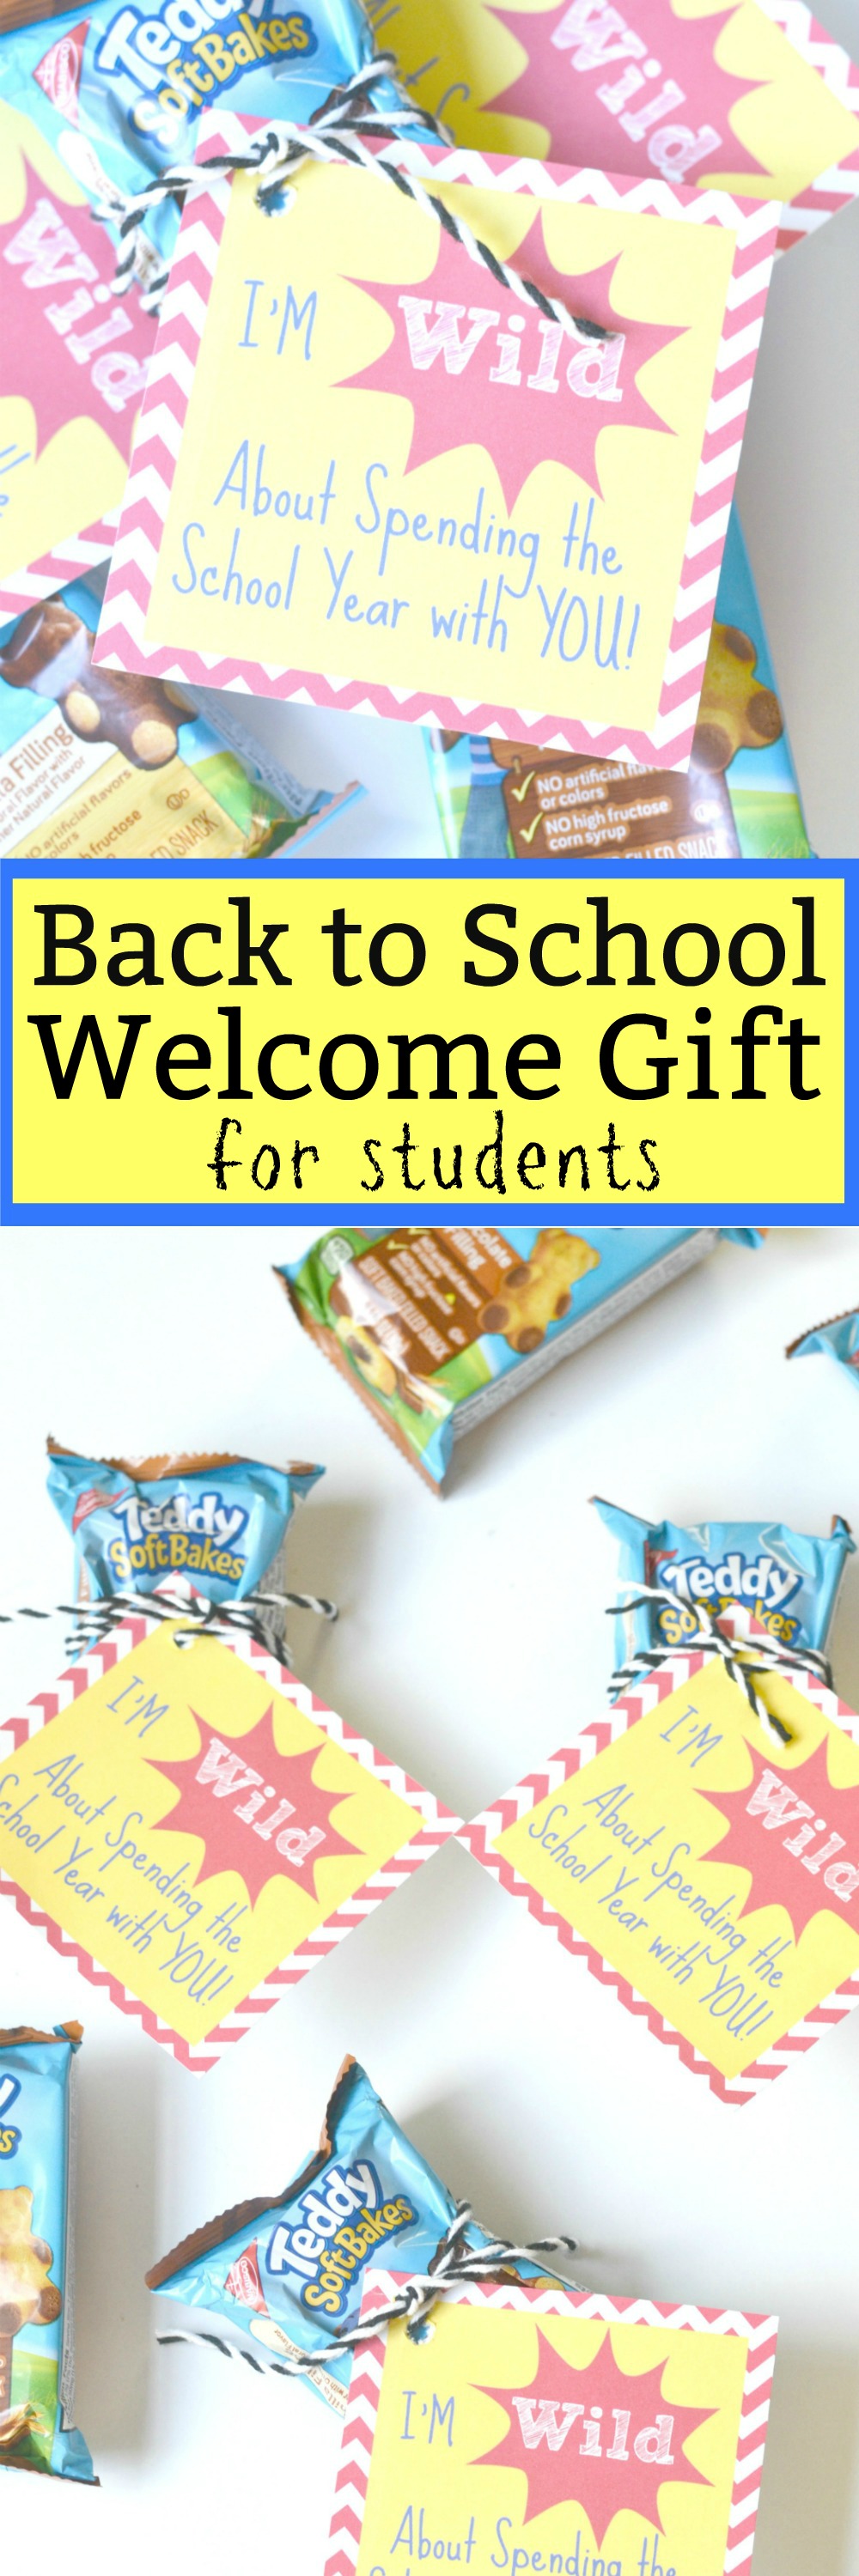 Back to School Welcome Gift for Students